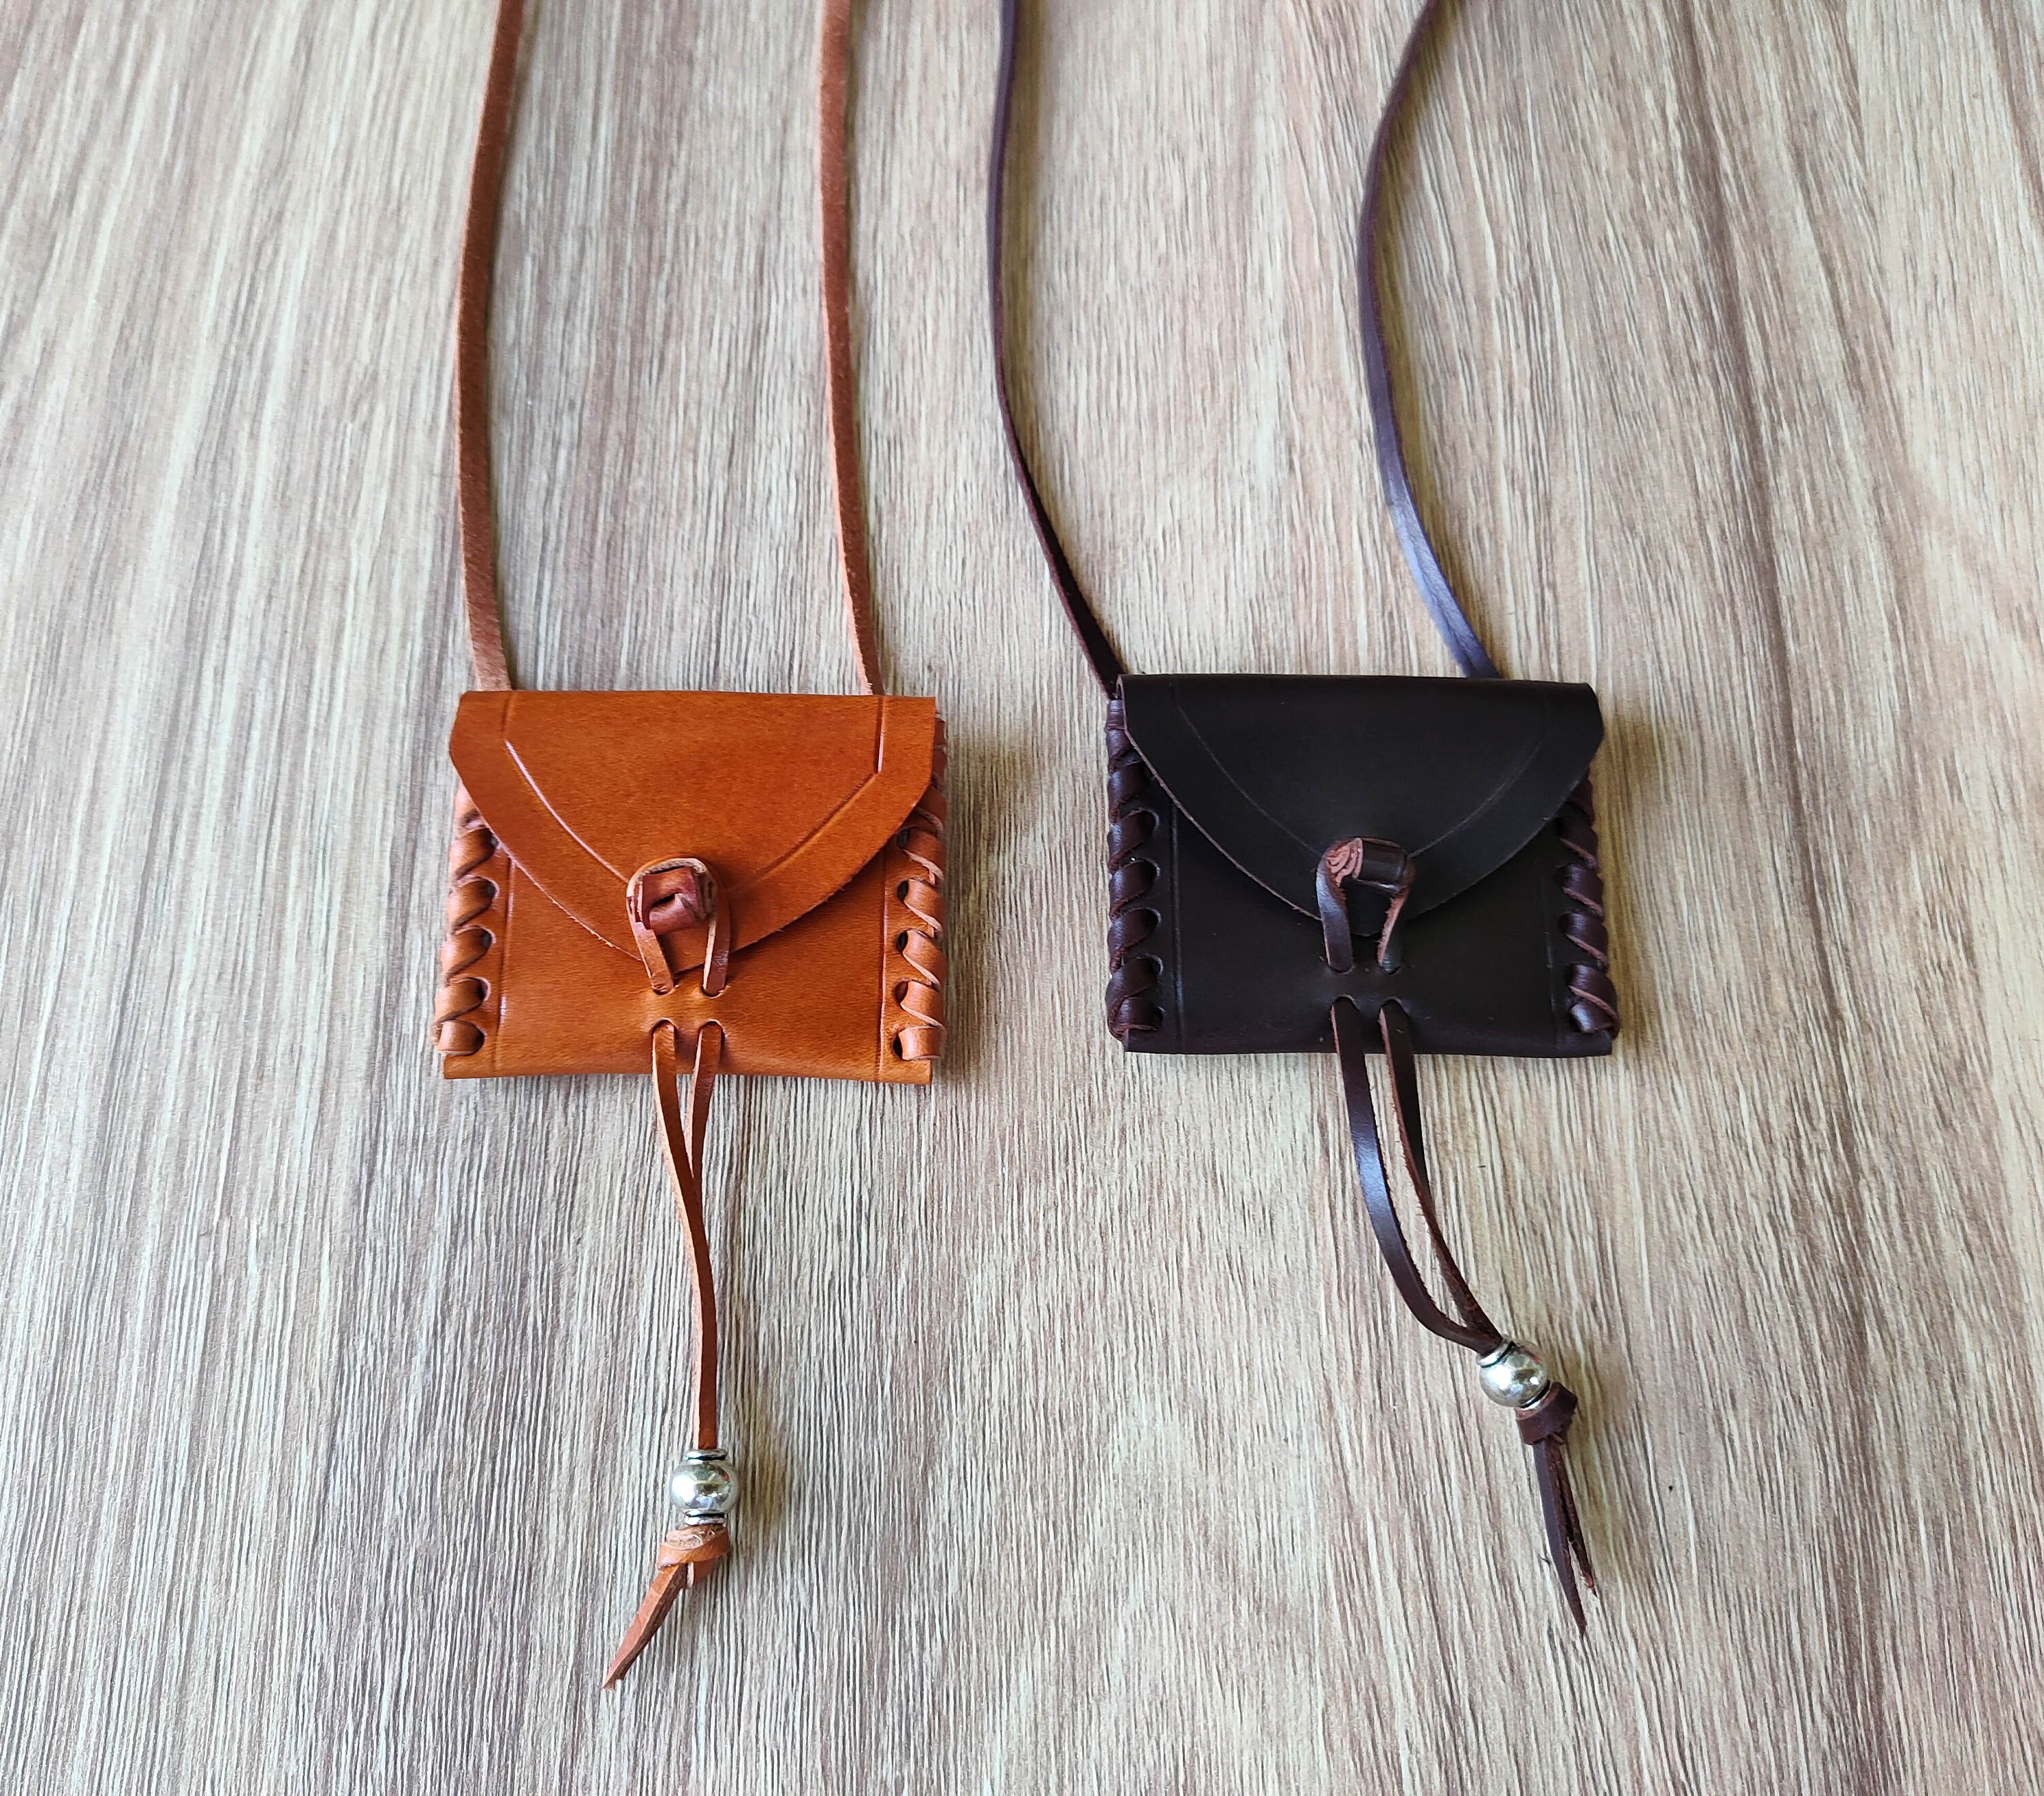  Small Black Leather Drawstring Medicine Tobacco  Pouch/Bag/Necklace by HJE : Everything Else